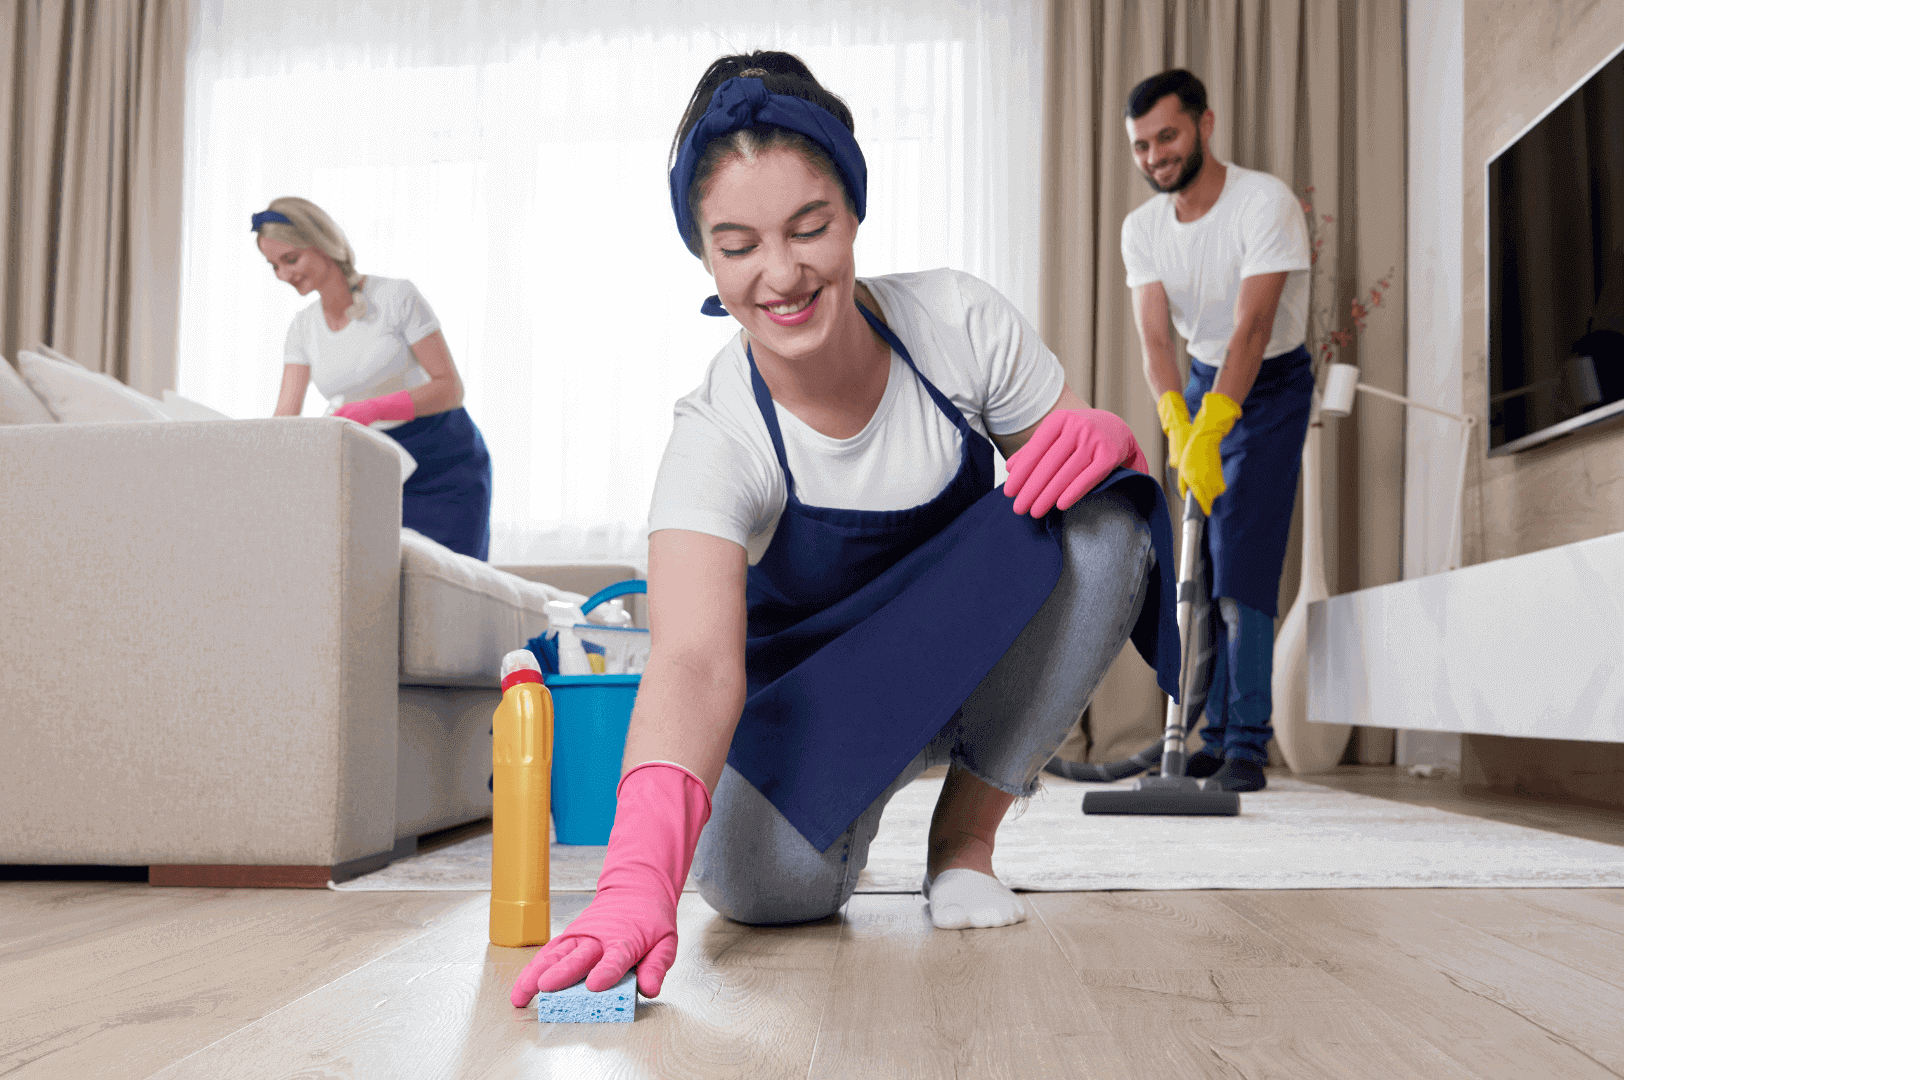 house cleaning services or residential cleaning services has high demand since the pandemic